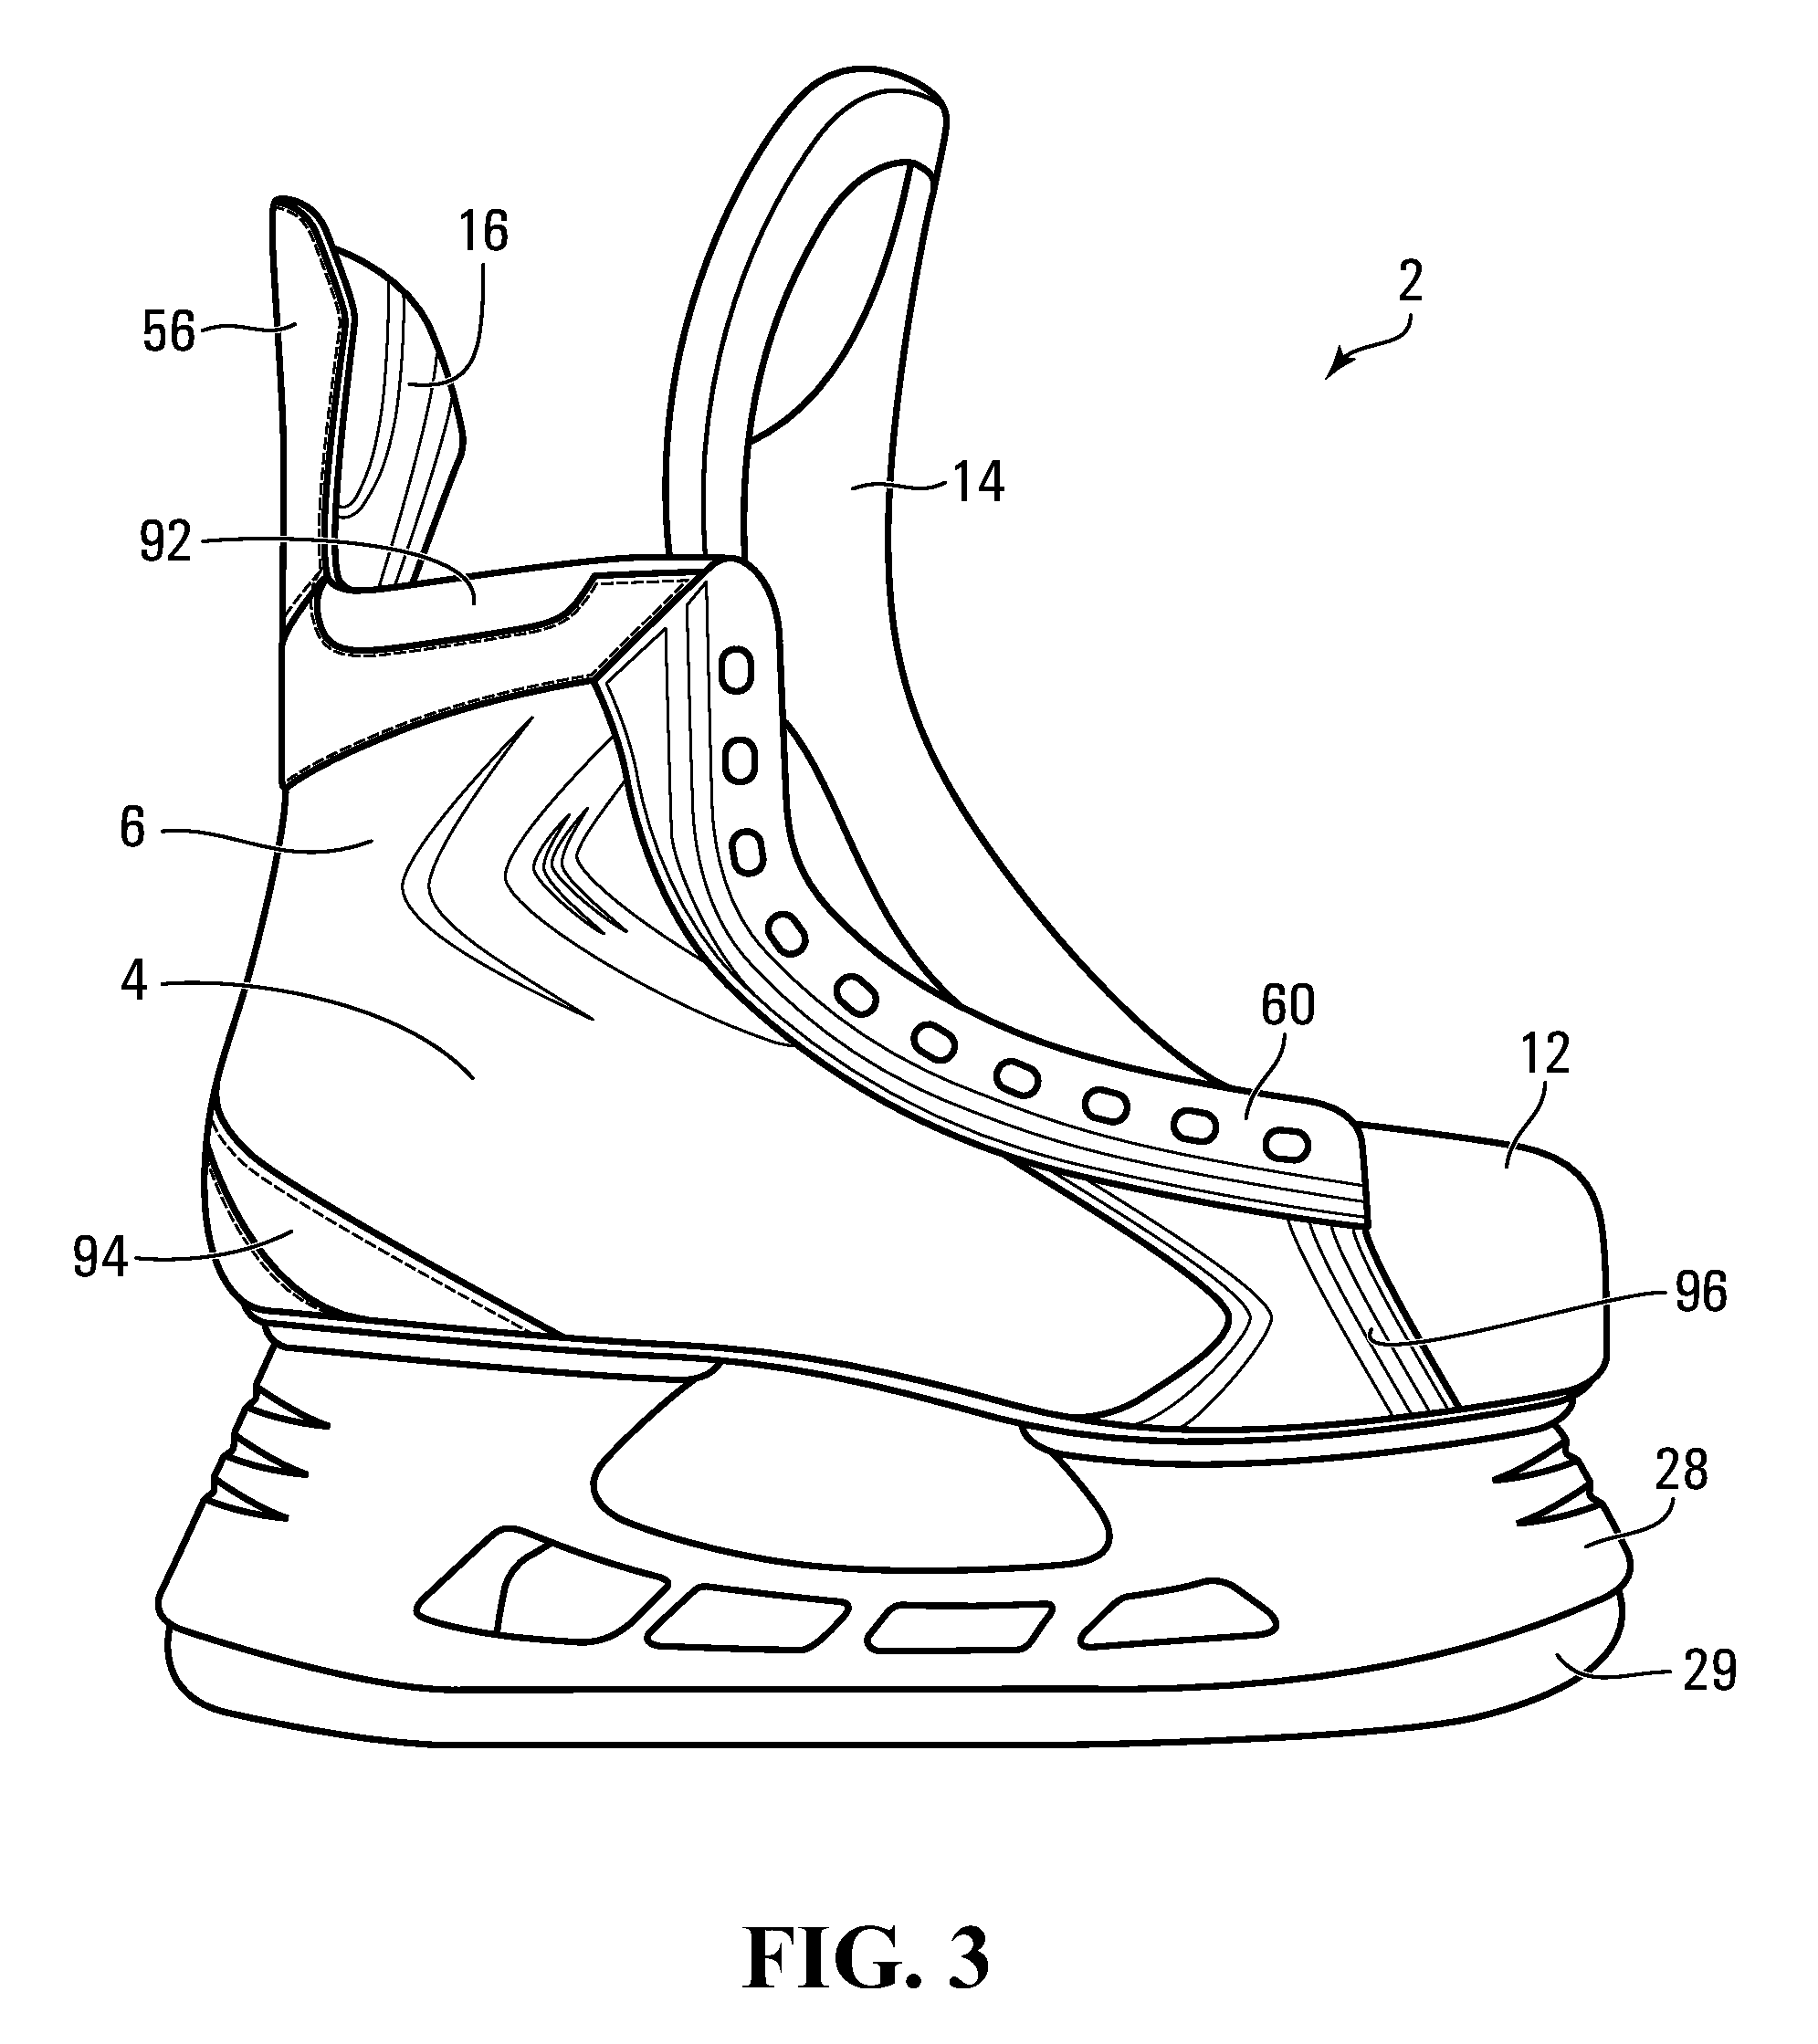 Skate boot having an inner liner with an abrasion resistant overlay